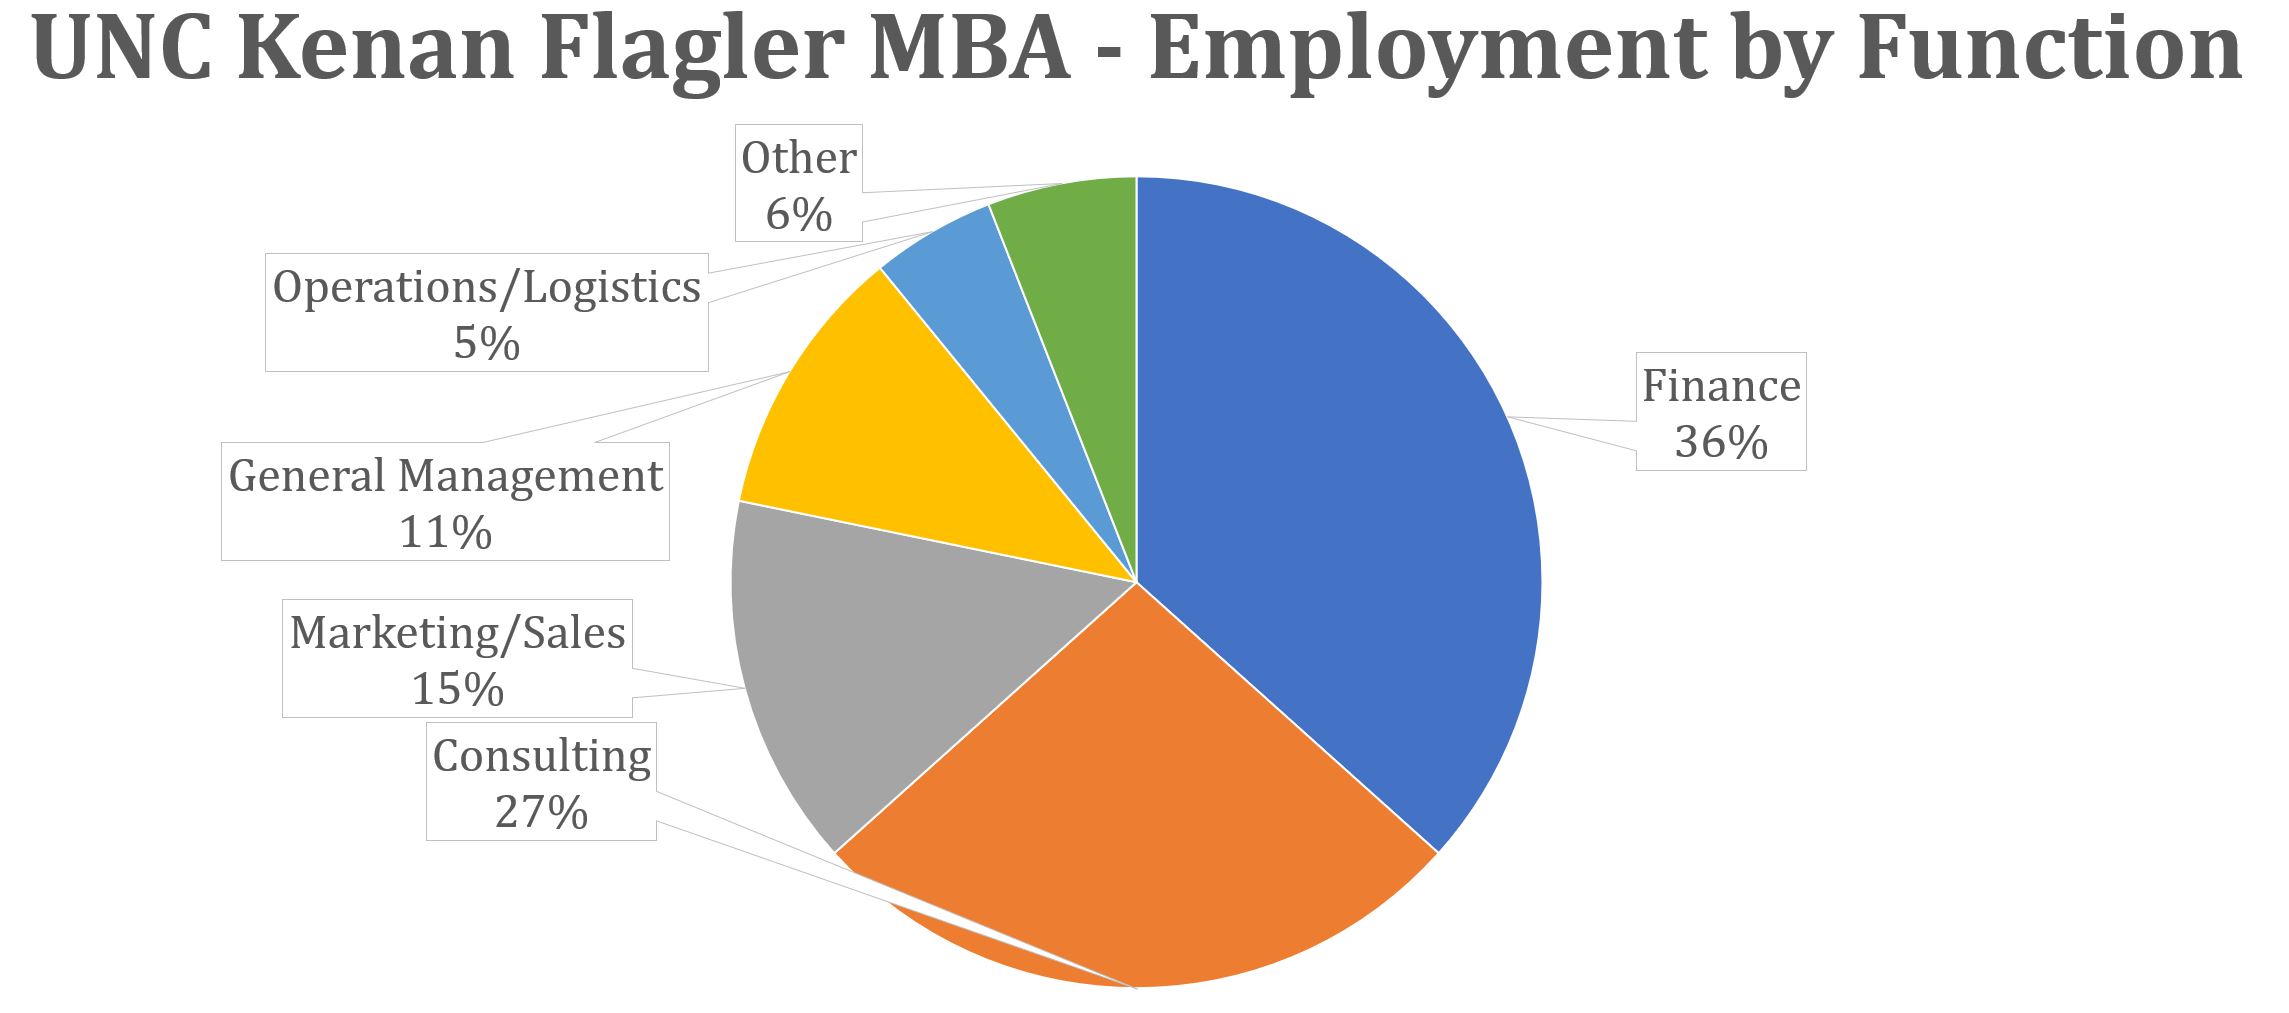 UNC Kenan Flagler MBA - Employment by Function